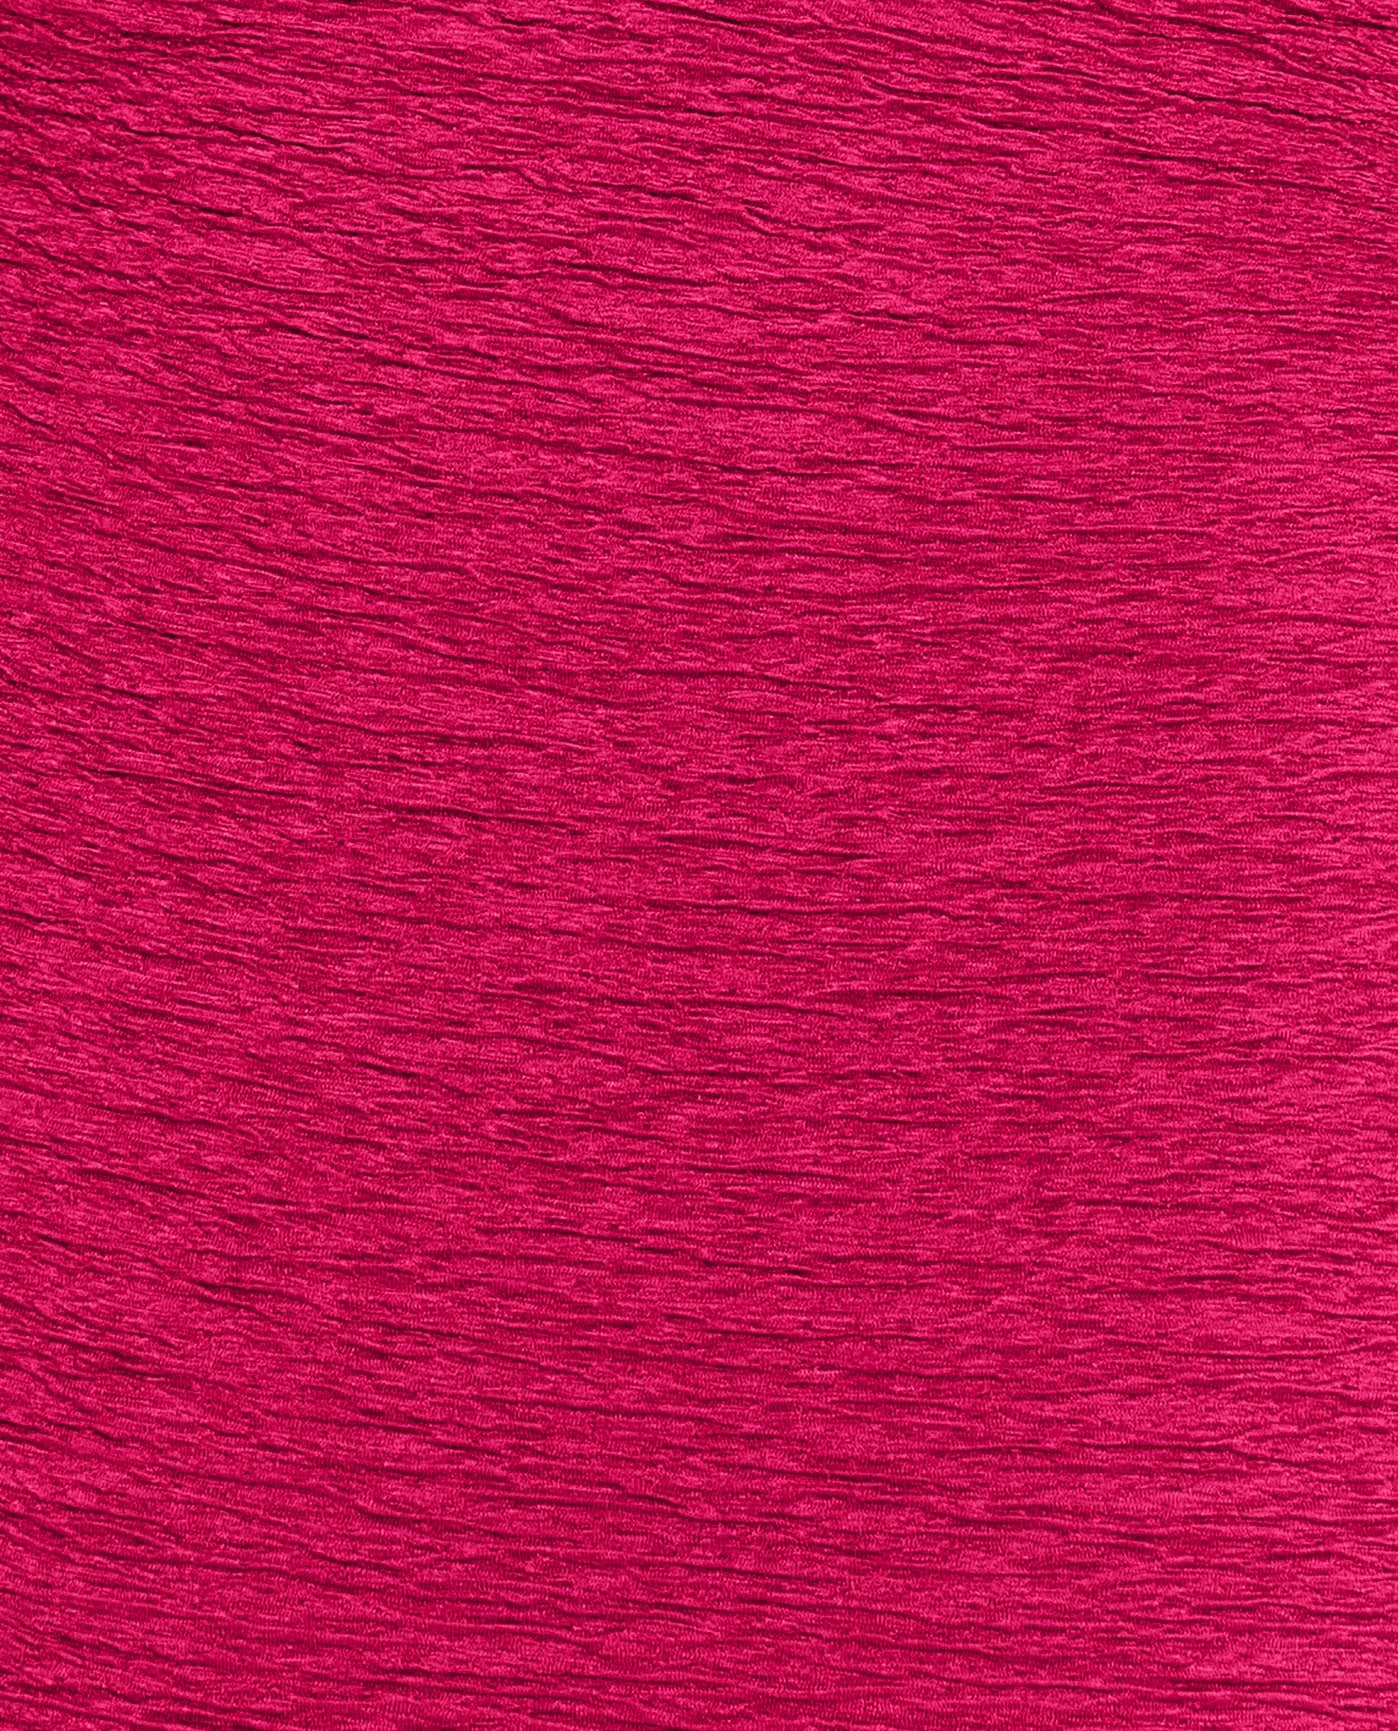 FABRIC SWATCH VIEW OF CHLORINE RESISTANT KRINKLE TEXTURED SOLID CROSS BACK ONE PIECE | KRINKLE BERRY